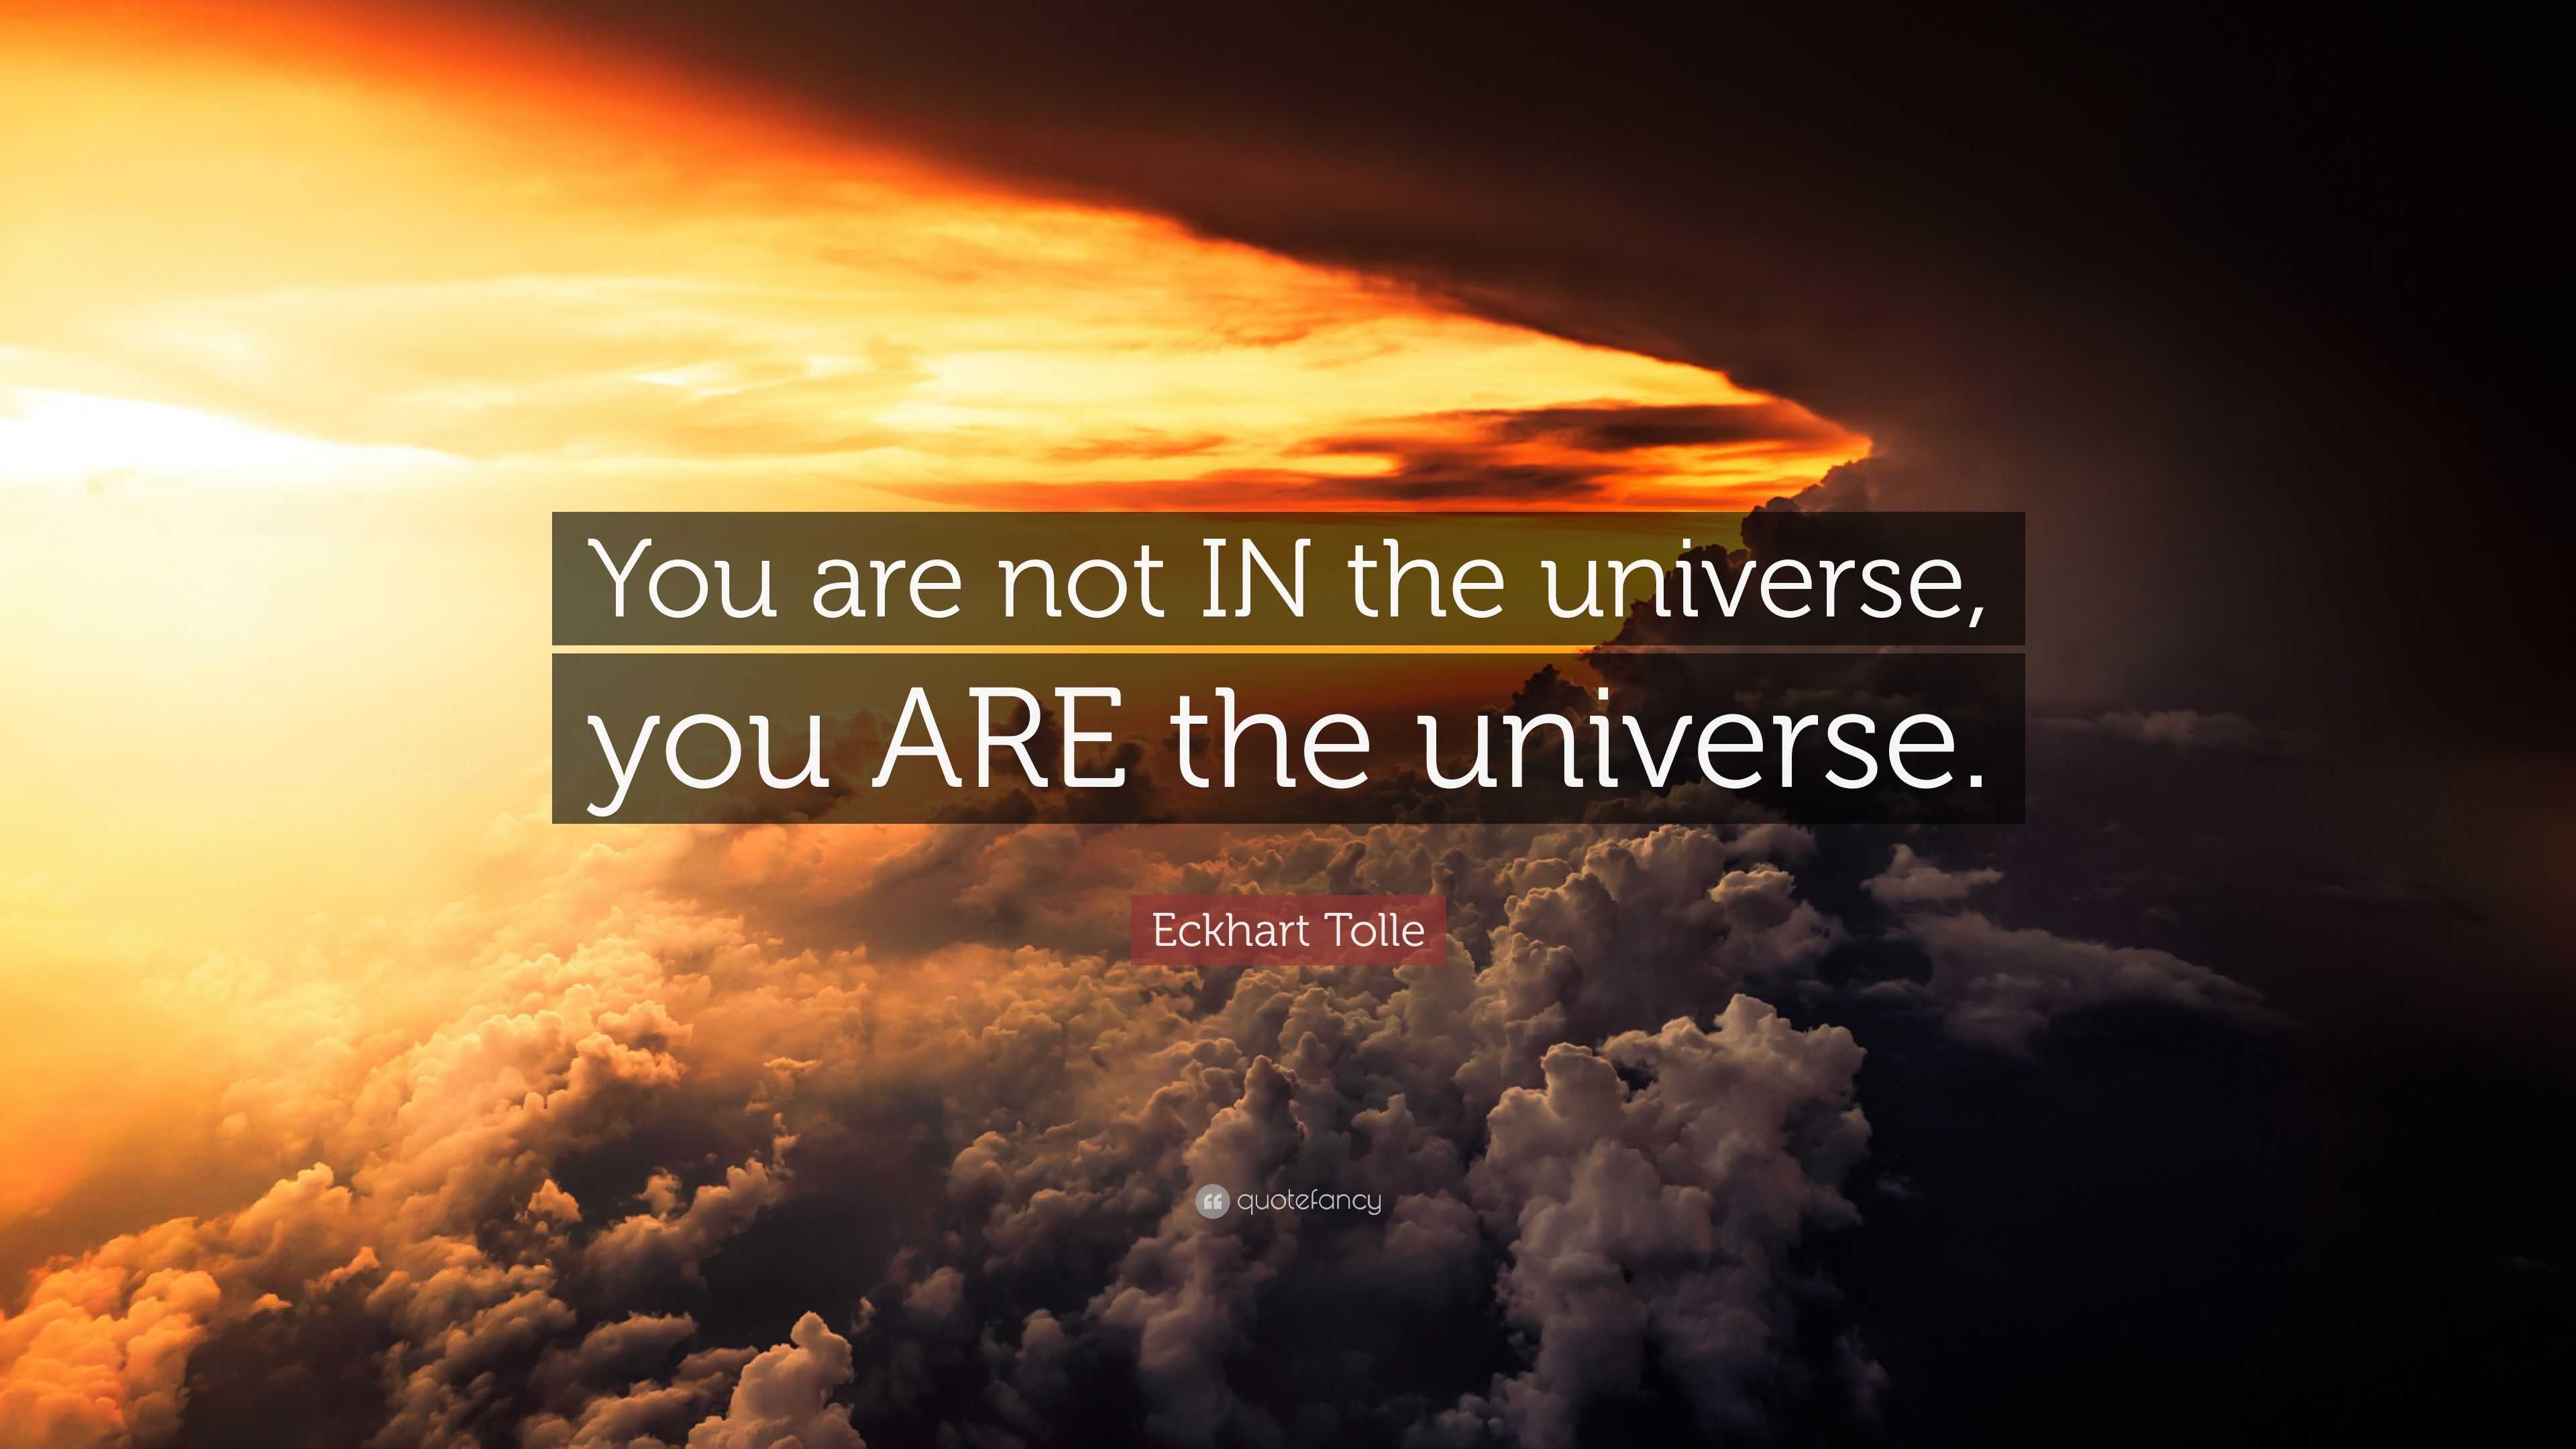 Eckhart Tolle Quote: “You are not IN the universe, you ARE the universe.”